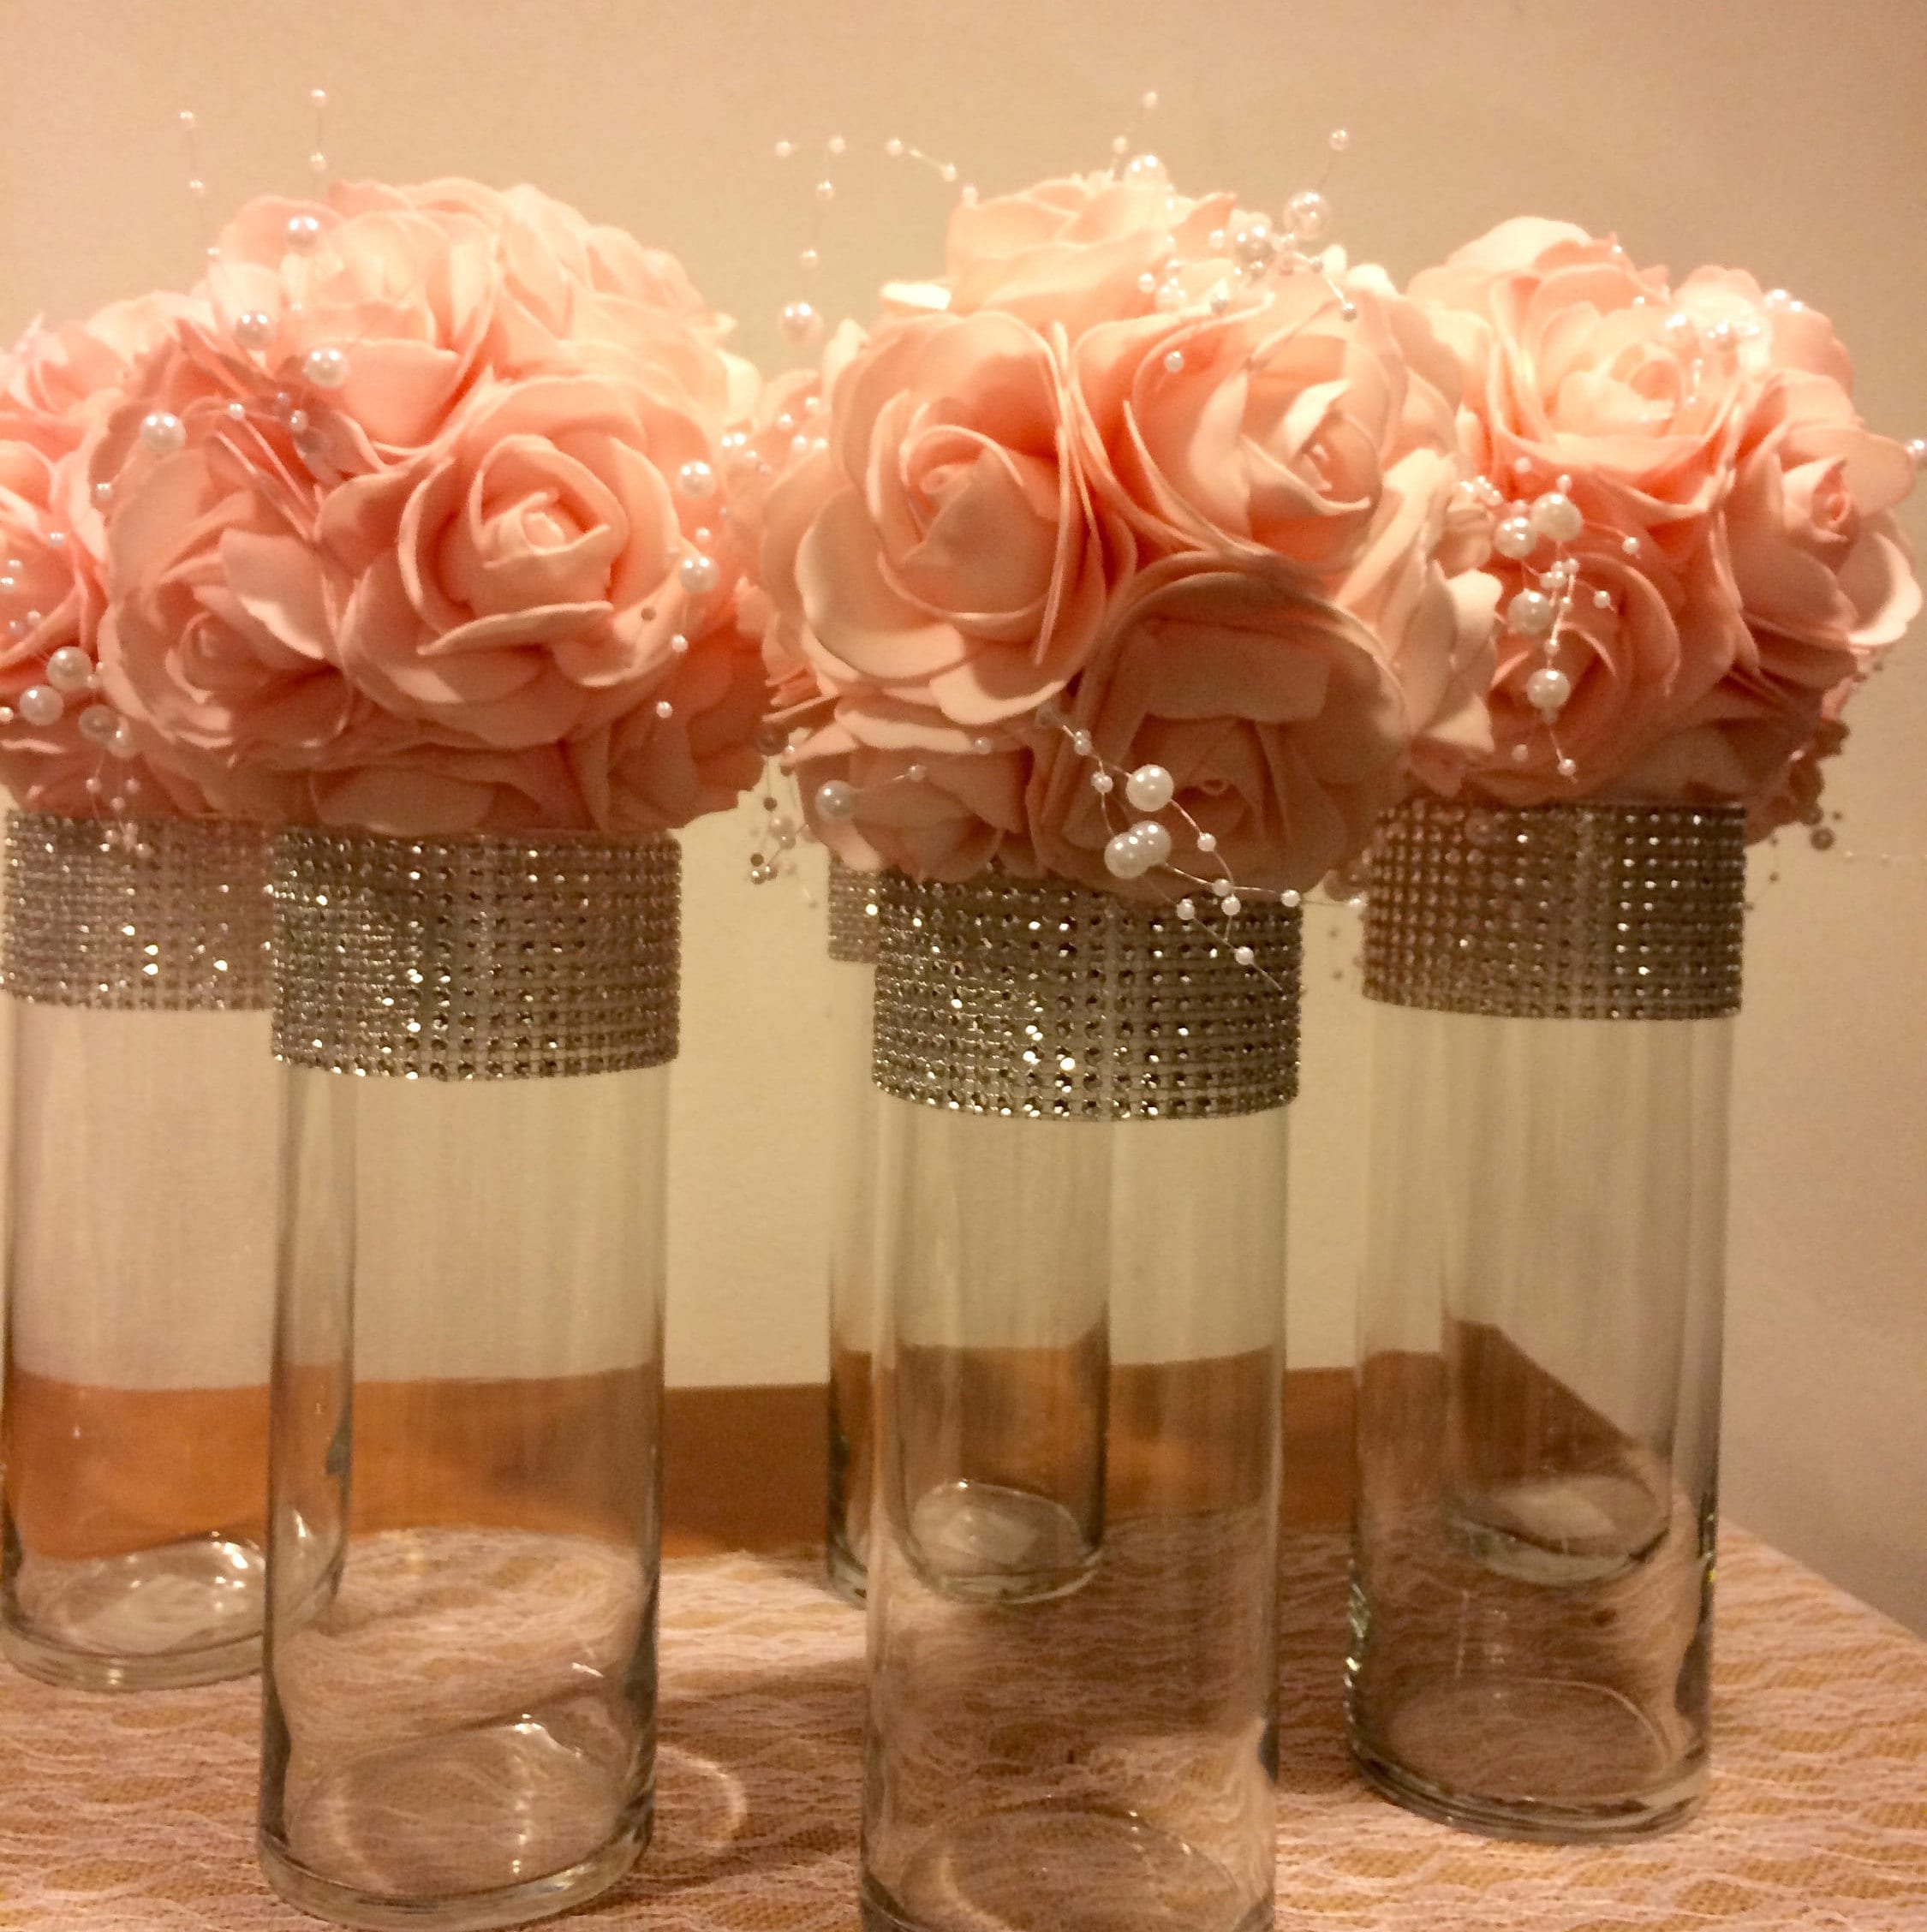 160 Floating Blush Pink & White Pearls With Matching Gems Fills 3 Gallons  For Vases. With Our Exclusive Measured Gels Floating Kit. Vase Decorations  – Floating Pearls